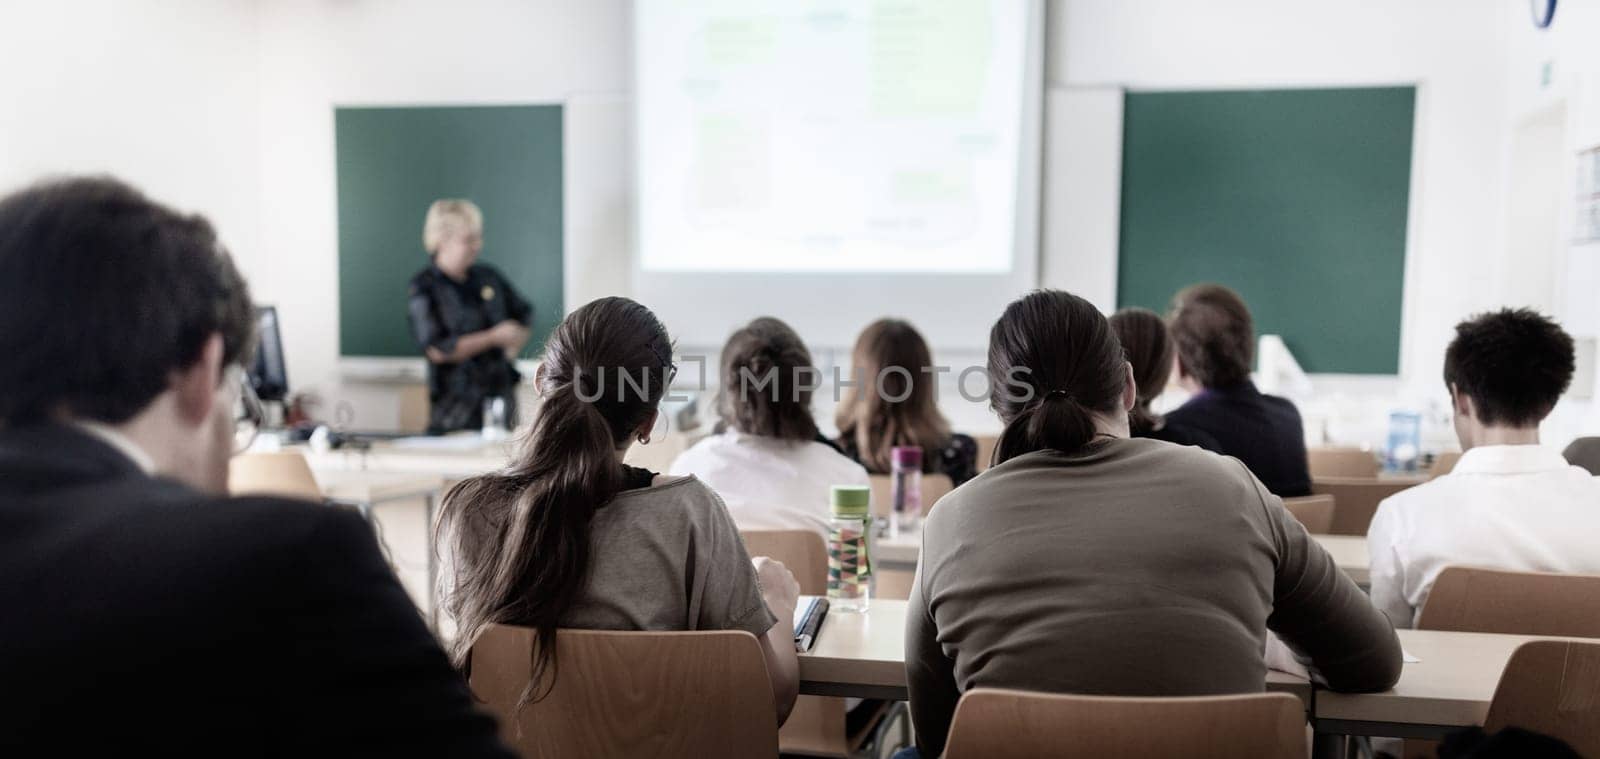 Teacher at university in front of a whiteboard screen. Students listening to lecture and making notes.